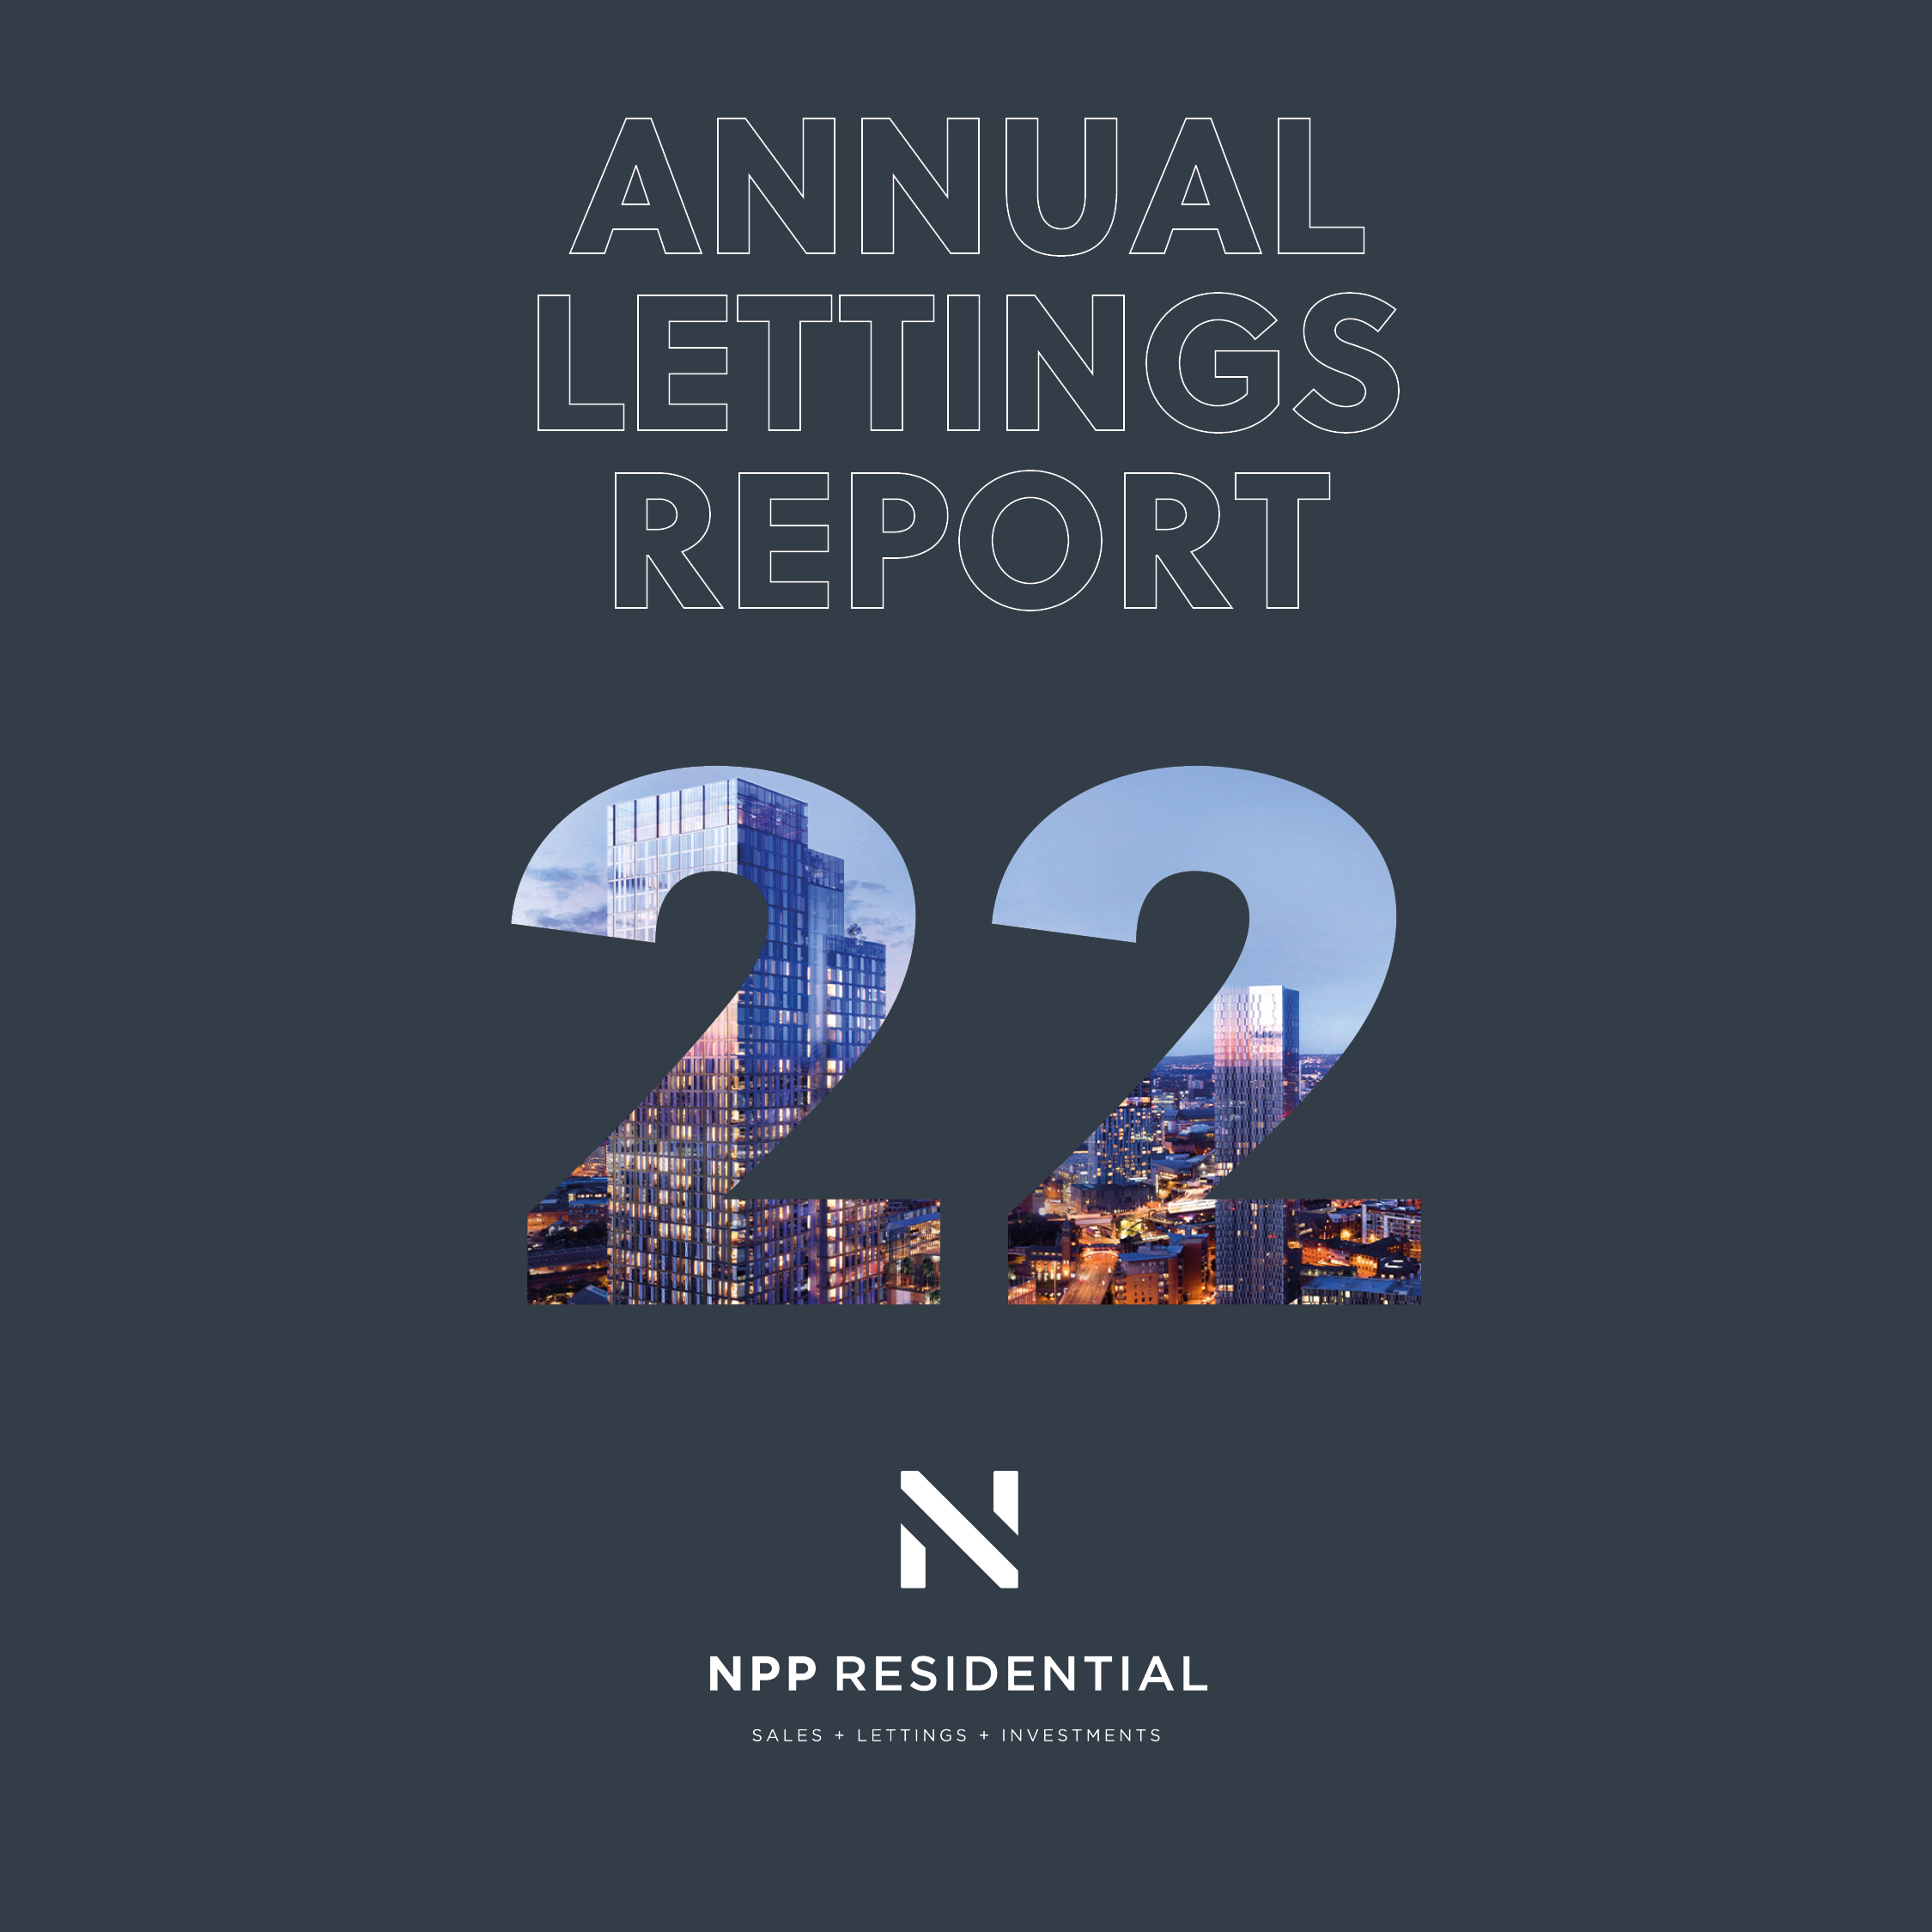 Annual Lettings Report Available Now